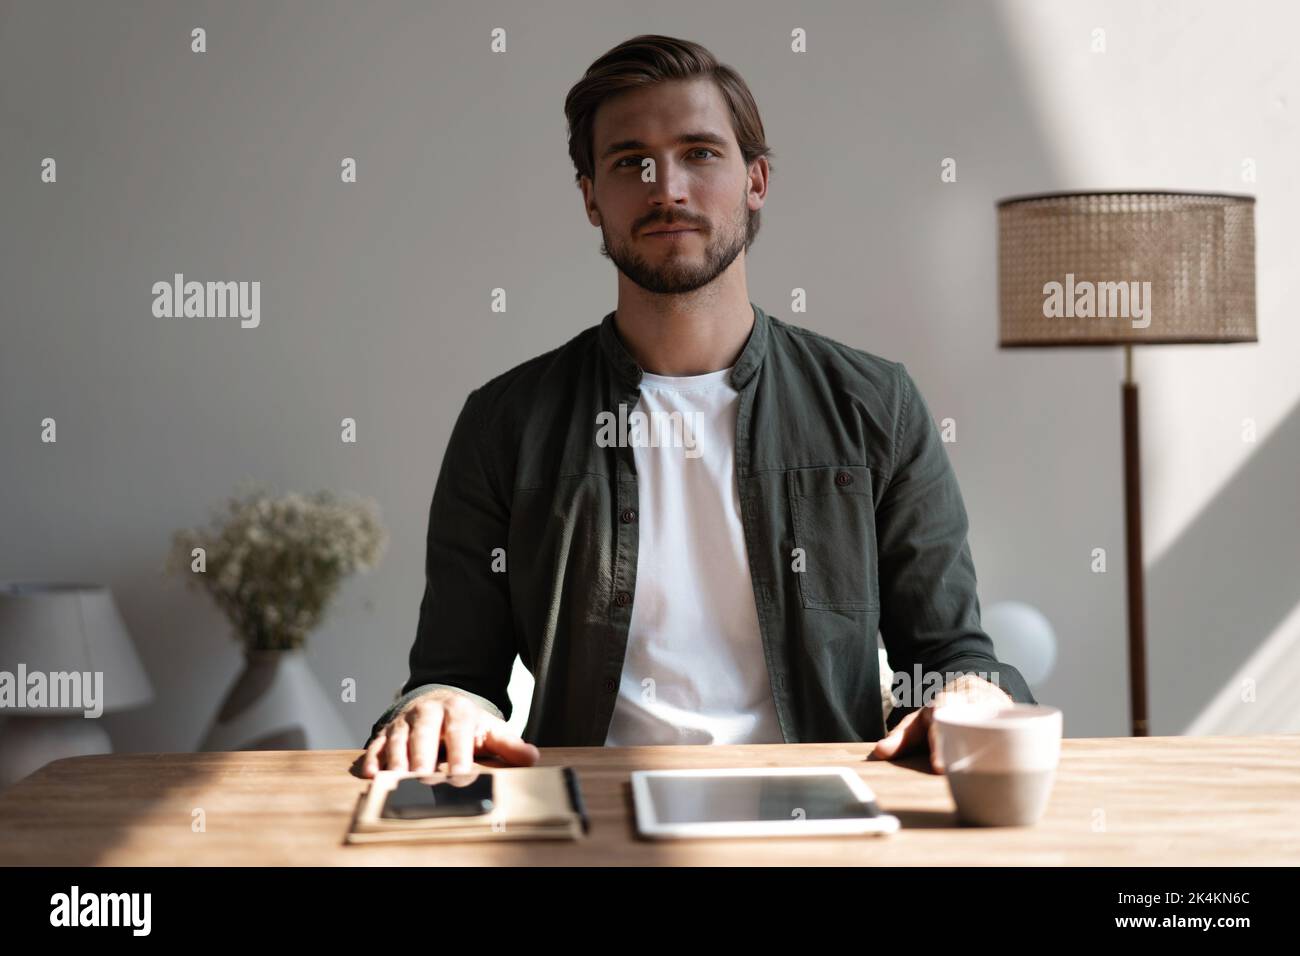 Good-looking millennial office employee sitting at desk smiling looking at camera. Successful worker, career advance and opportunity, owner of prosper Stock Photo